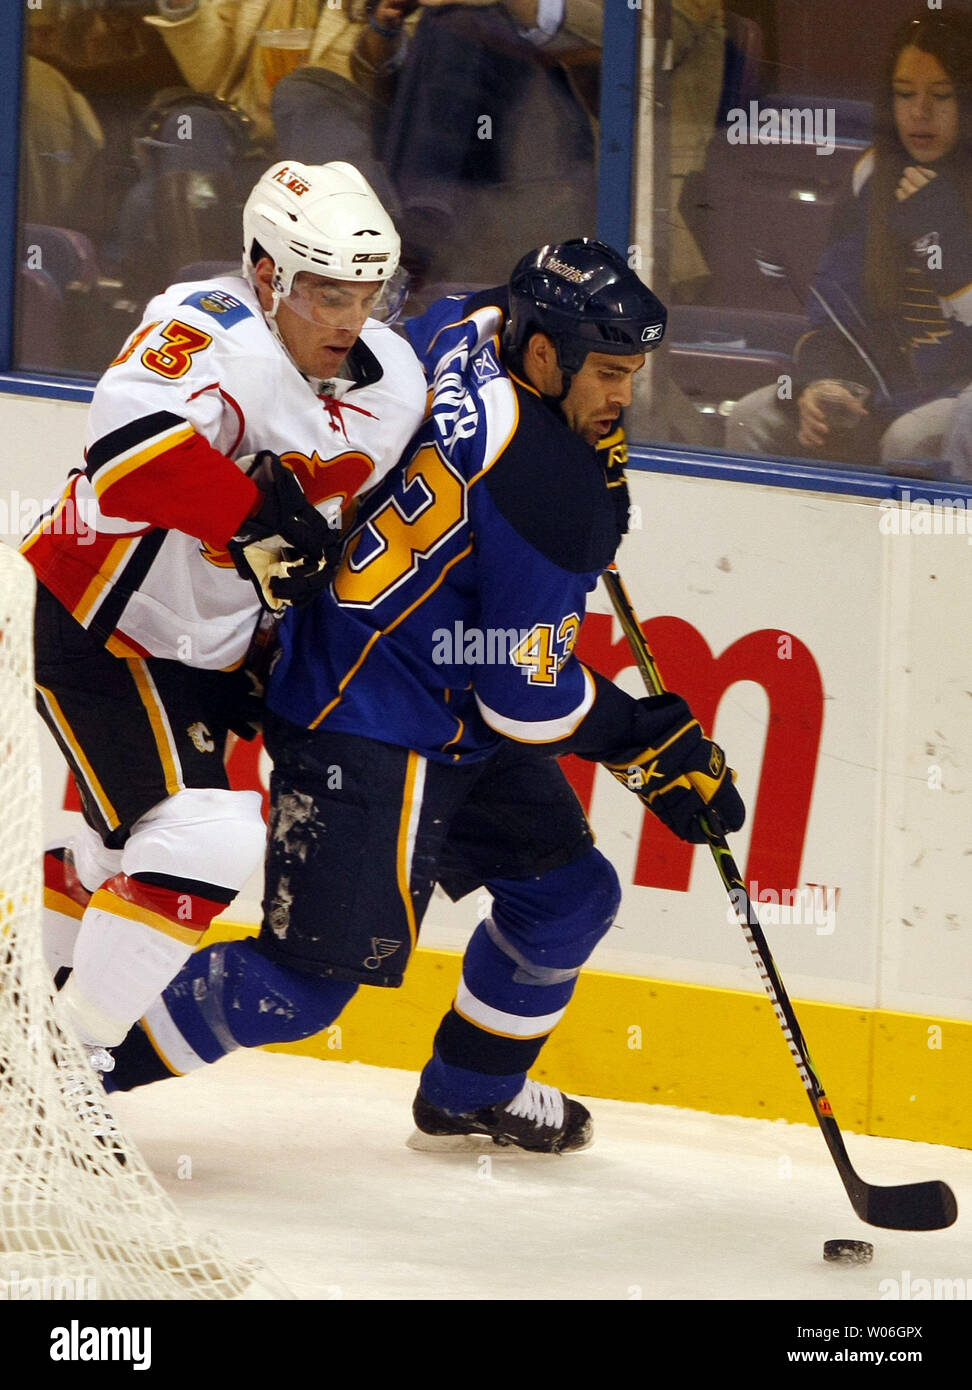 Calgary Flames Michael Cammalleri (L) applies pressure to St. Louis Blues Mike Weaver near the St. Louis net in the first period at the Scottrade Center in St. Louis on December 16, 2008. Calgary won the game 6-2.  (UPI Photo/Bill Greenblatt) Stock Photo